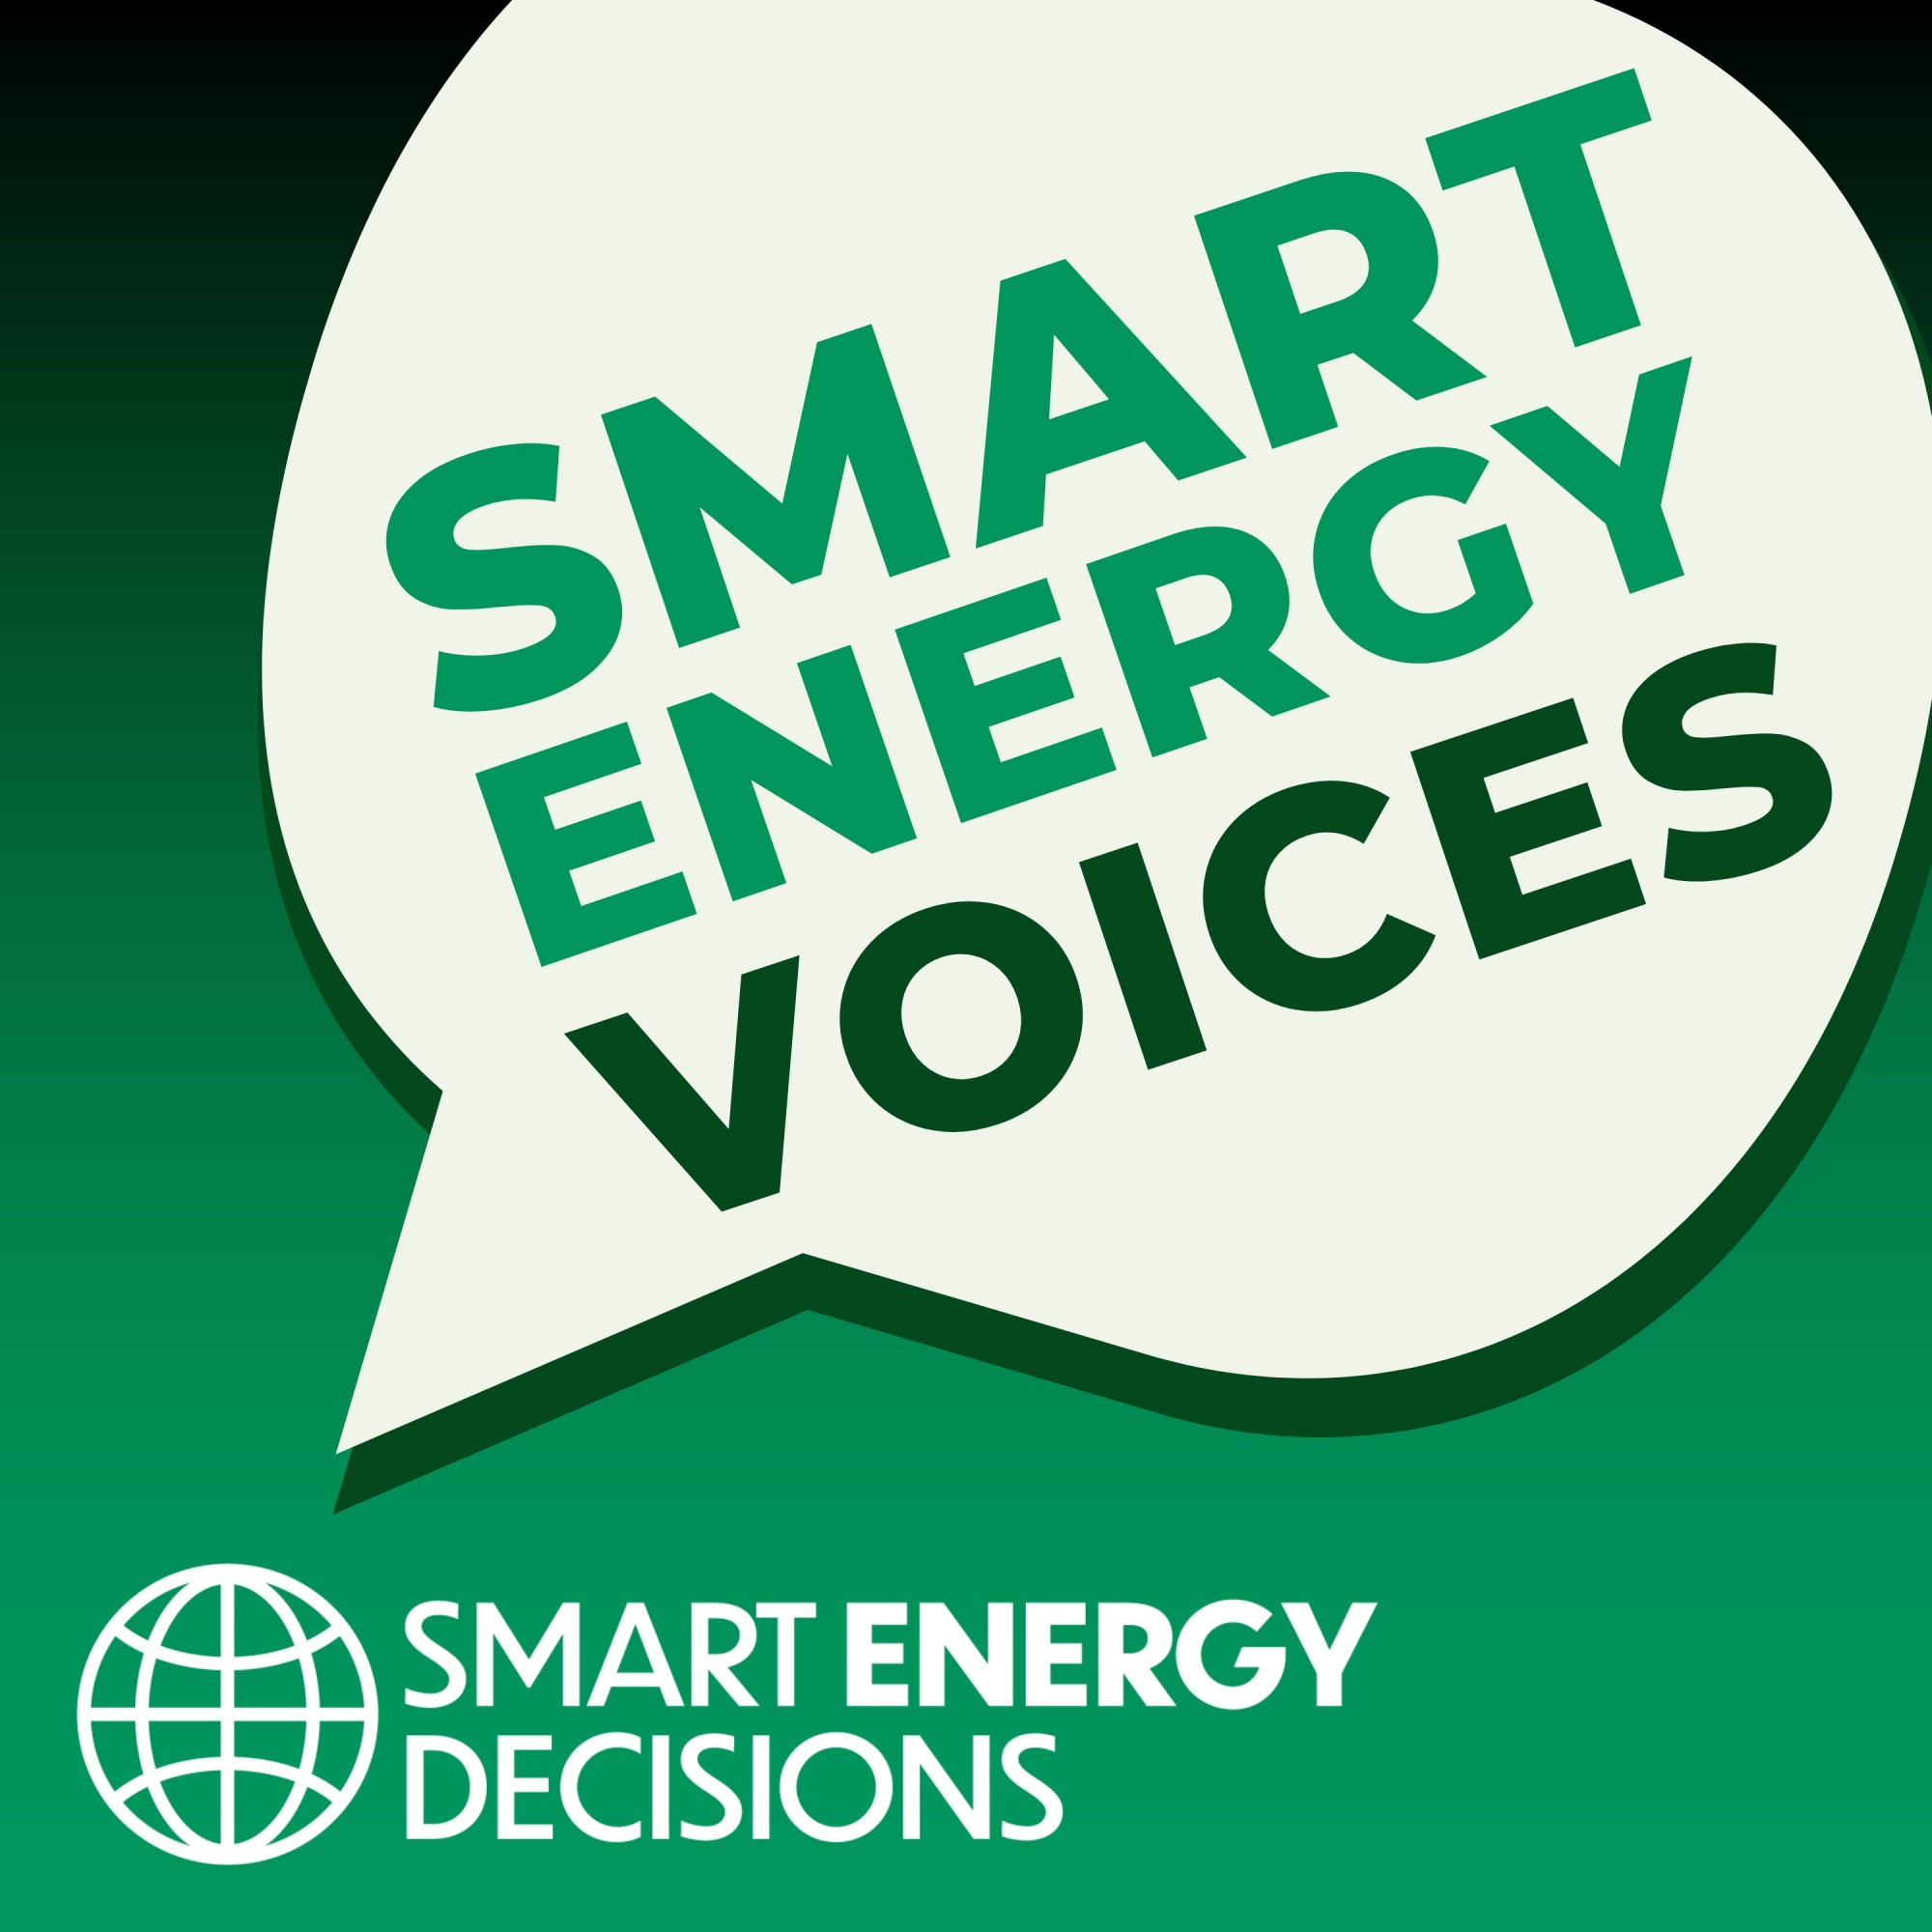 Smart Energy Voices Podcast: Episode 102 - Heard at Net Zero Forum: The Decarbonization Journey Begins With Energy Efficiency